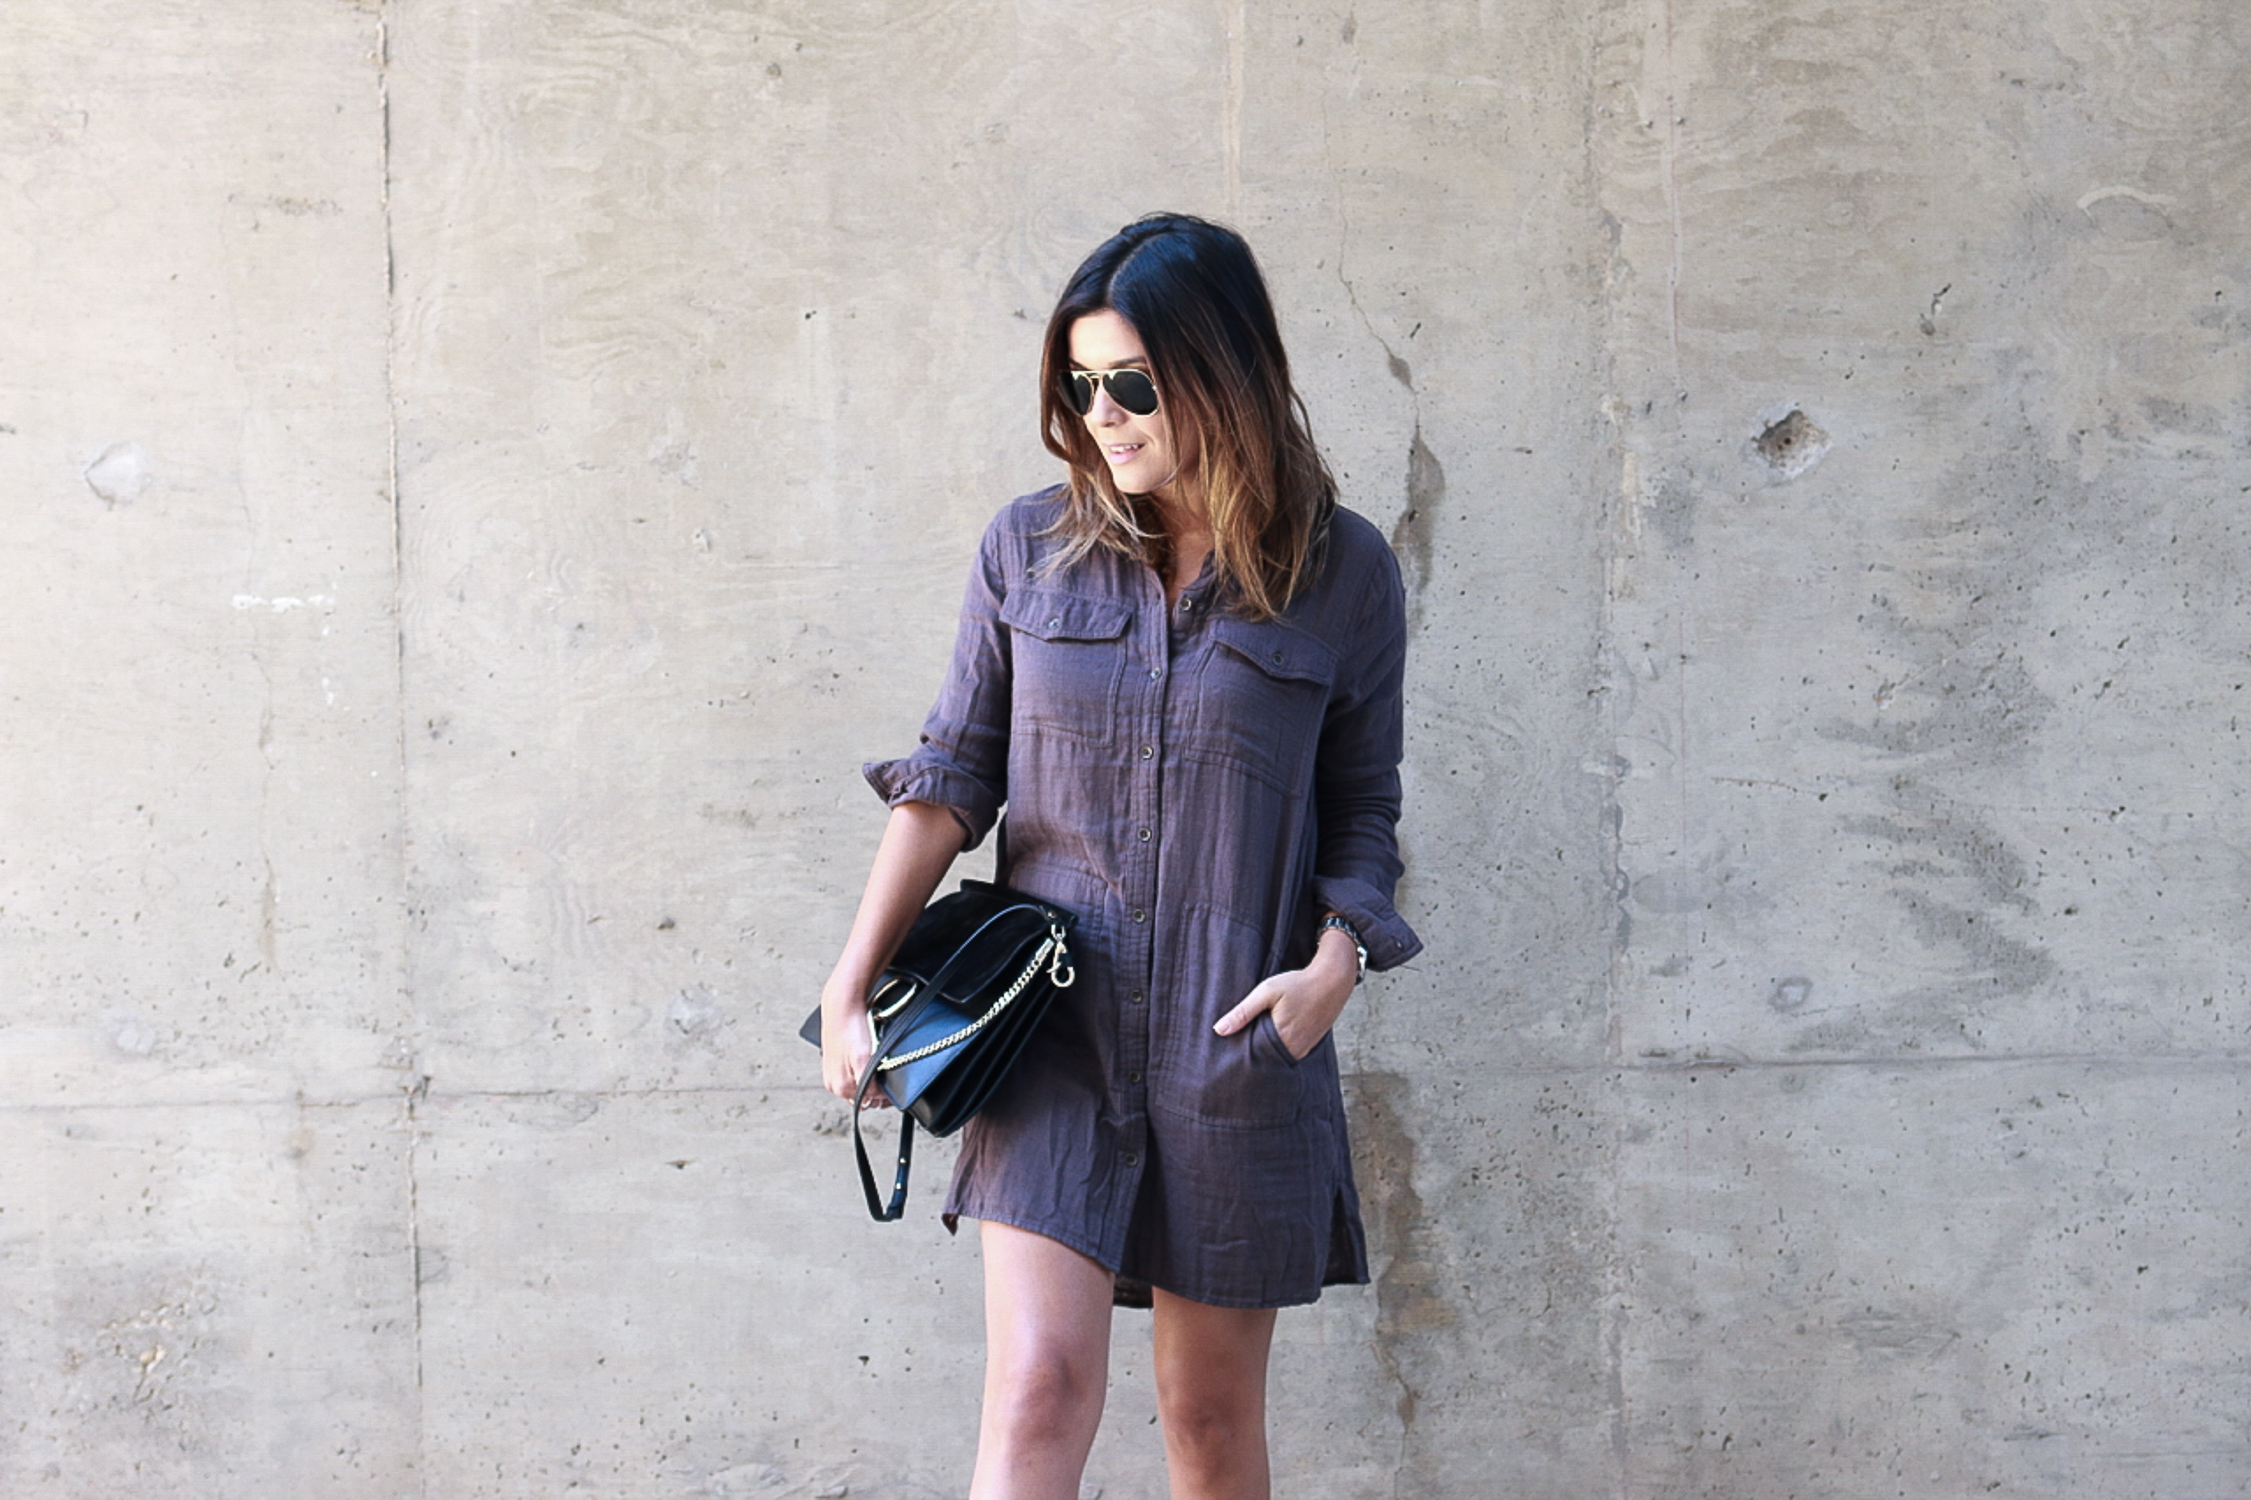 Utility Shirtdress from Forever 21